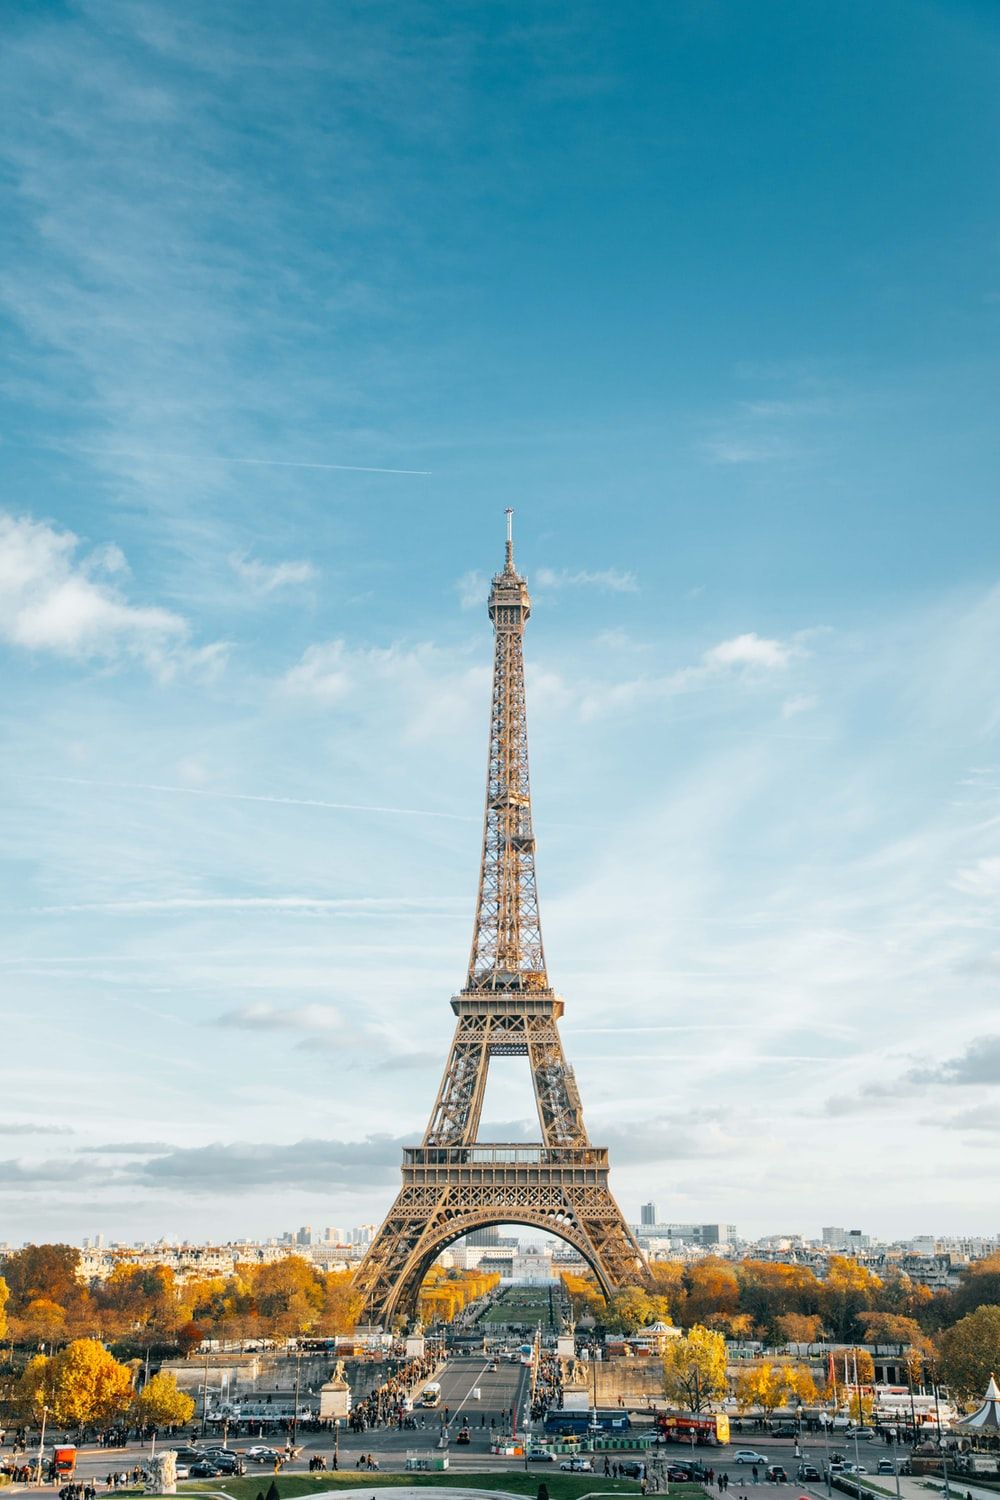 Stunning Paris Picture [Scenic Travel Photo]. Download Free Image